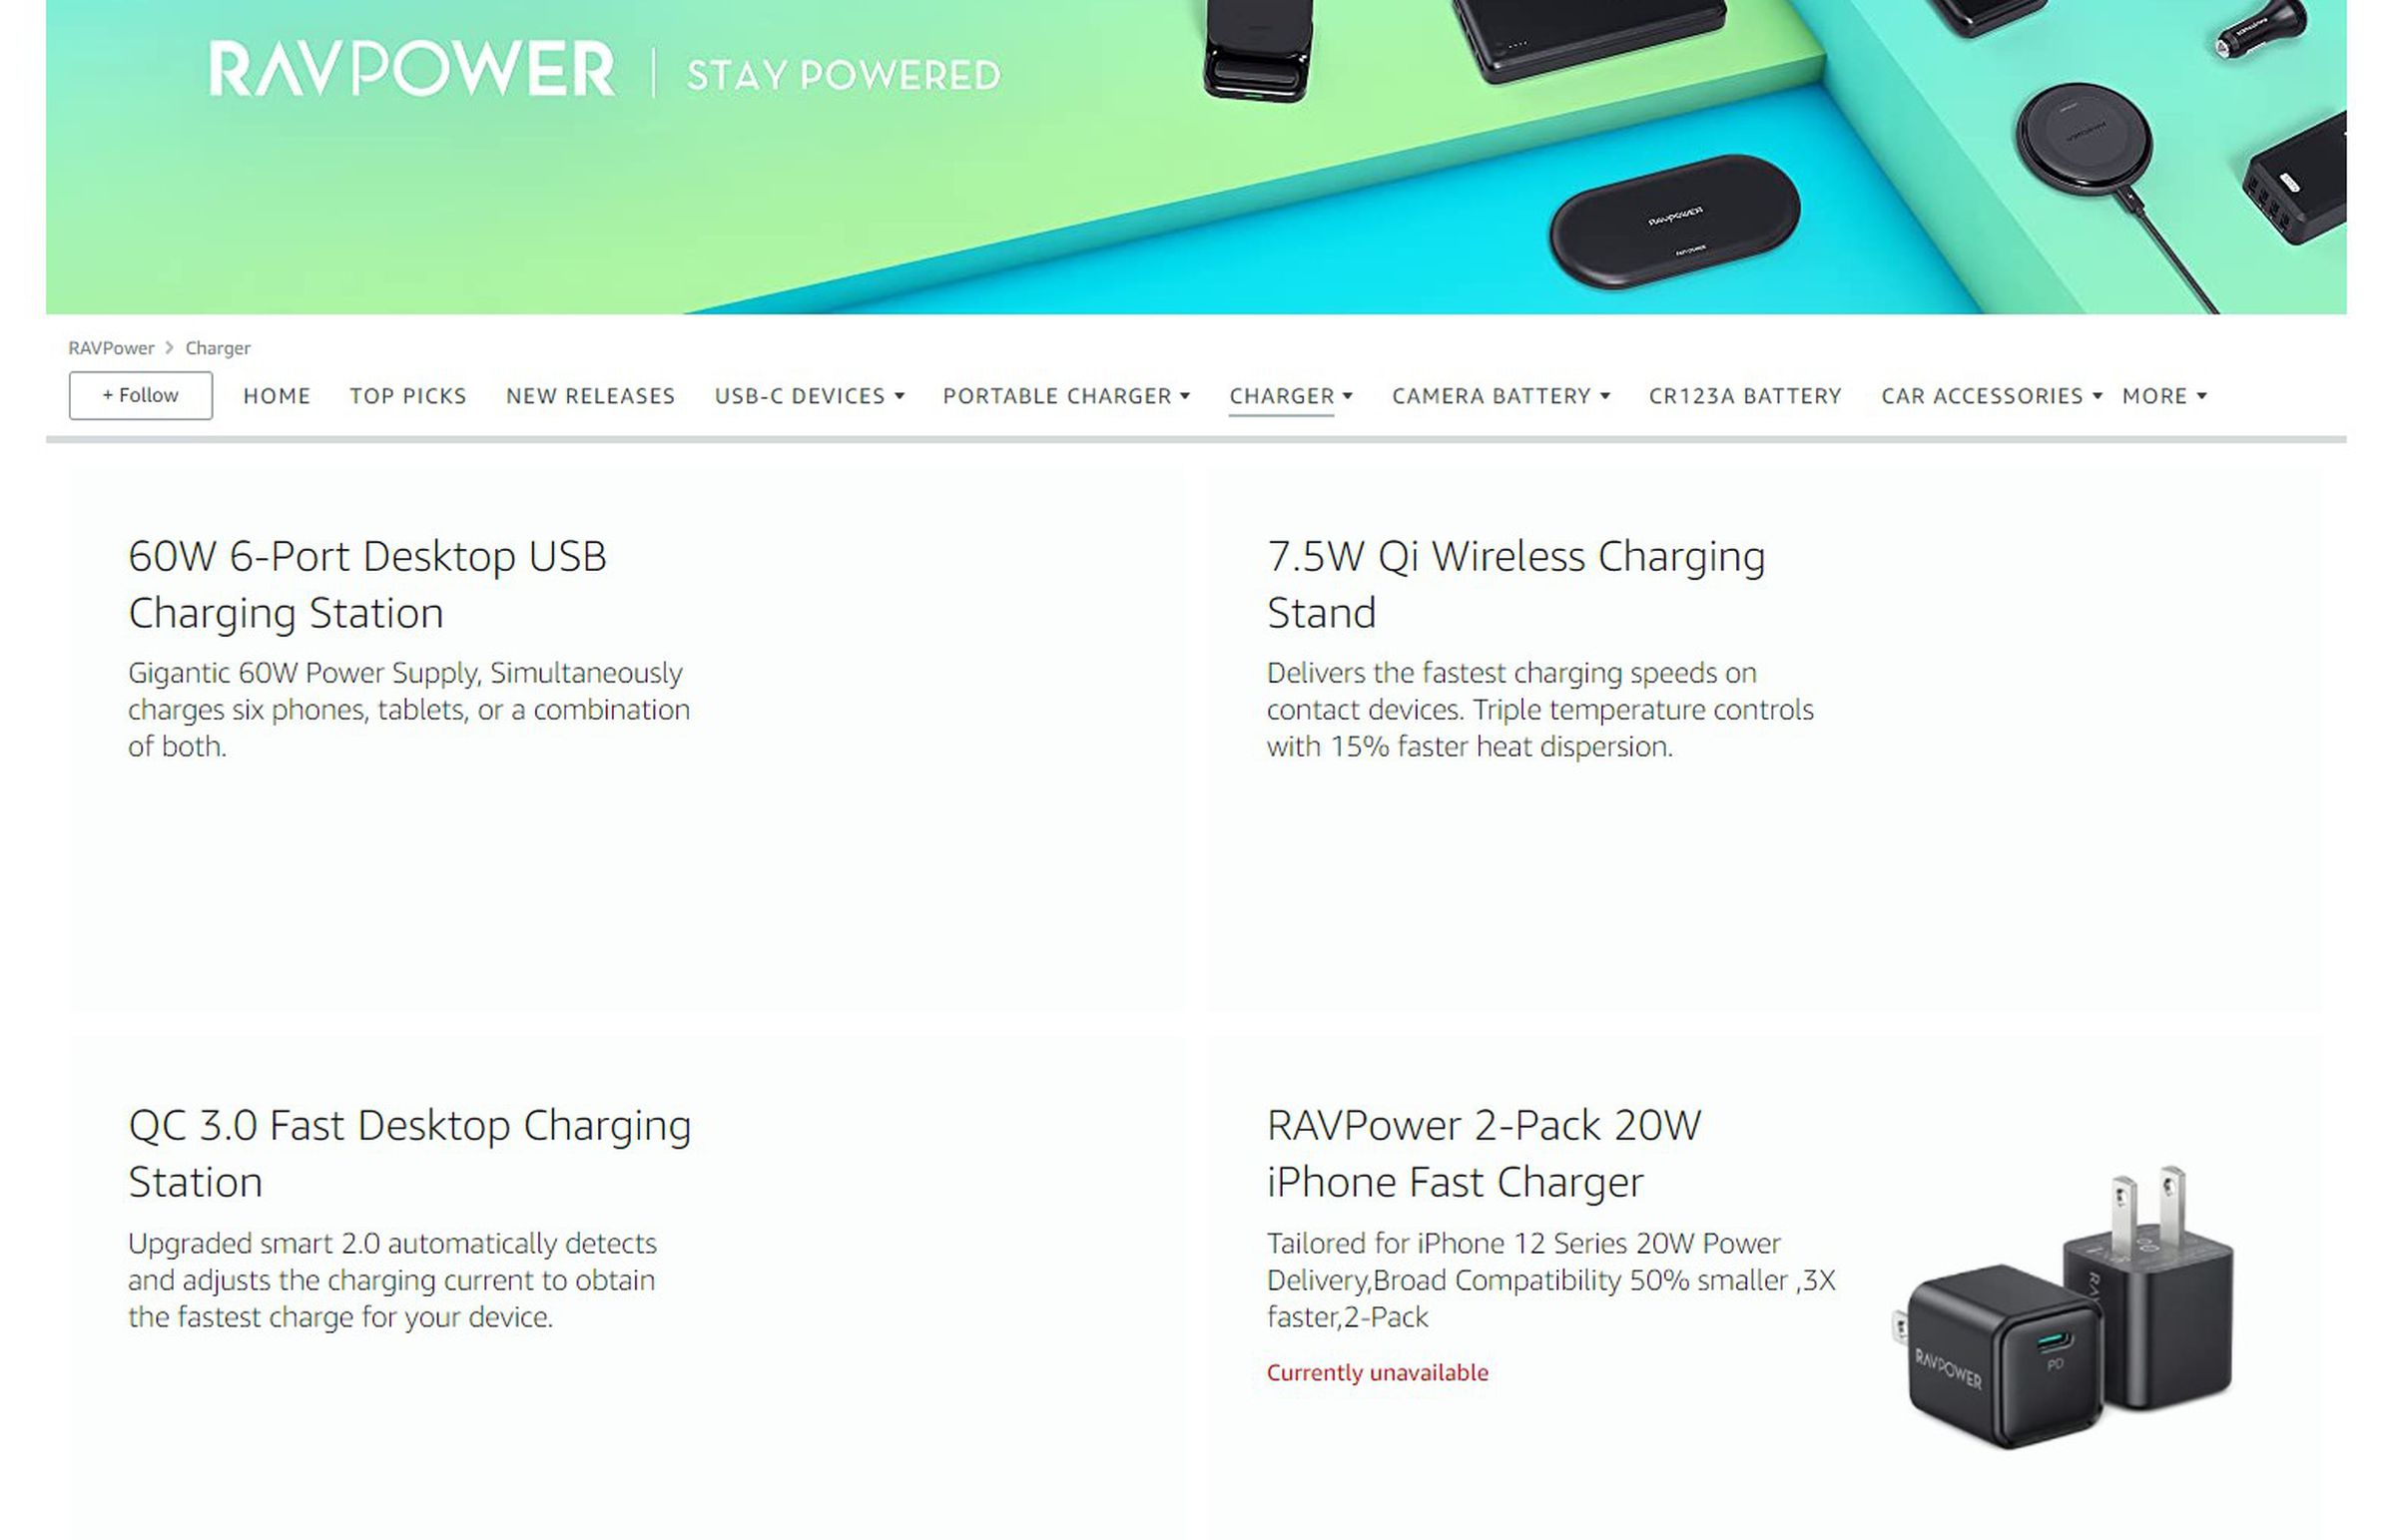 RavPower’s seller page is still up, but it’s empty.